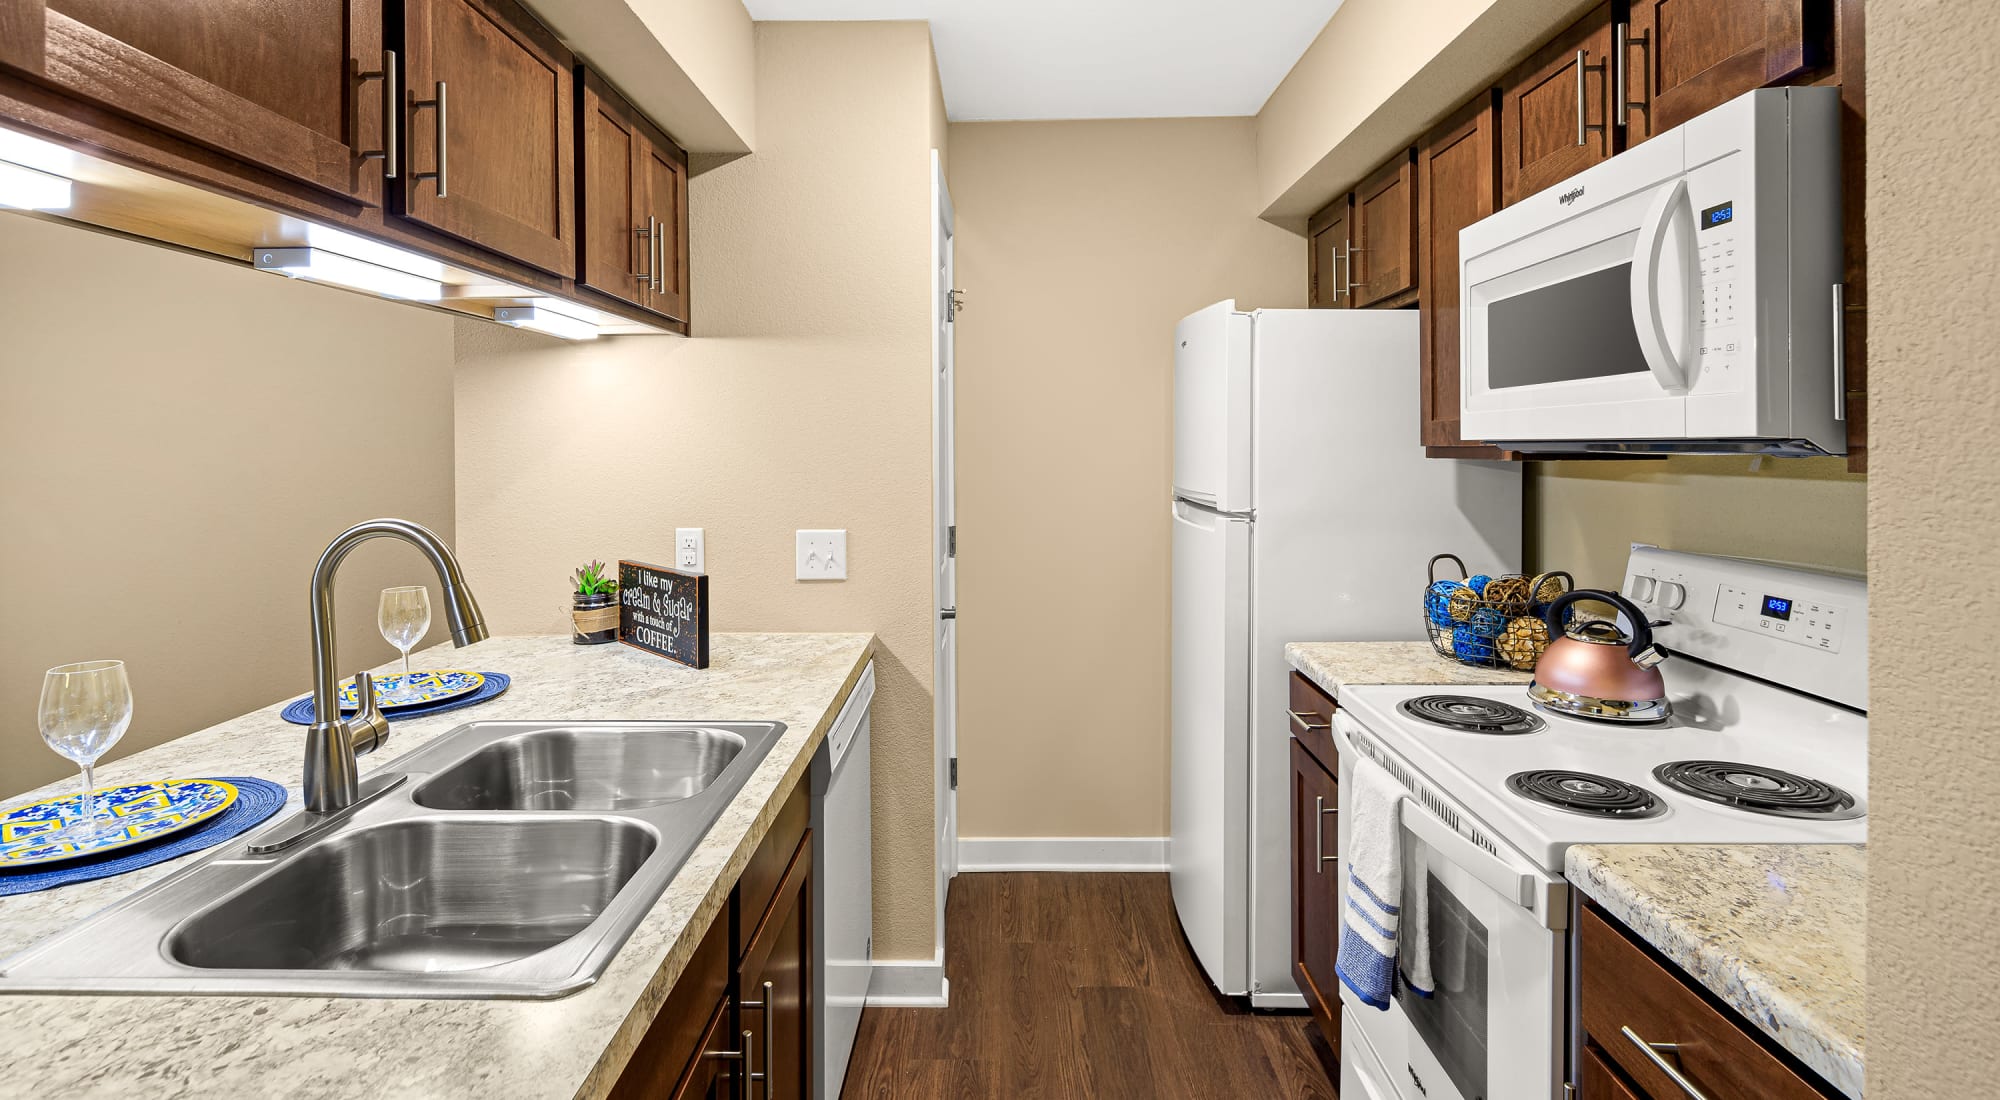 Kitchen at Stoneybrook Apartments and Townhomes